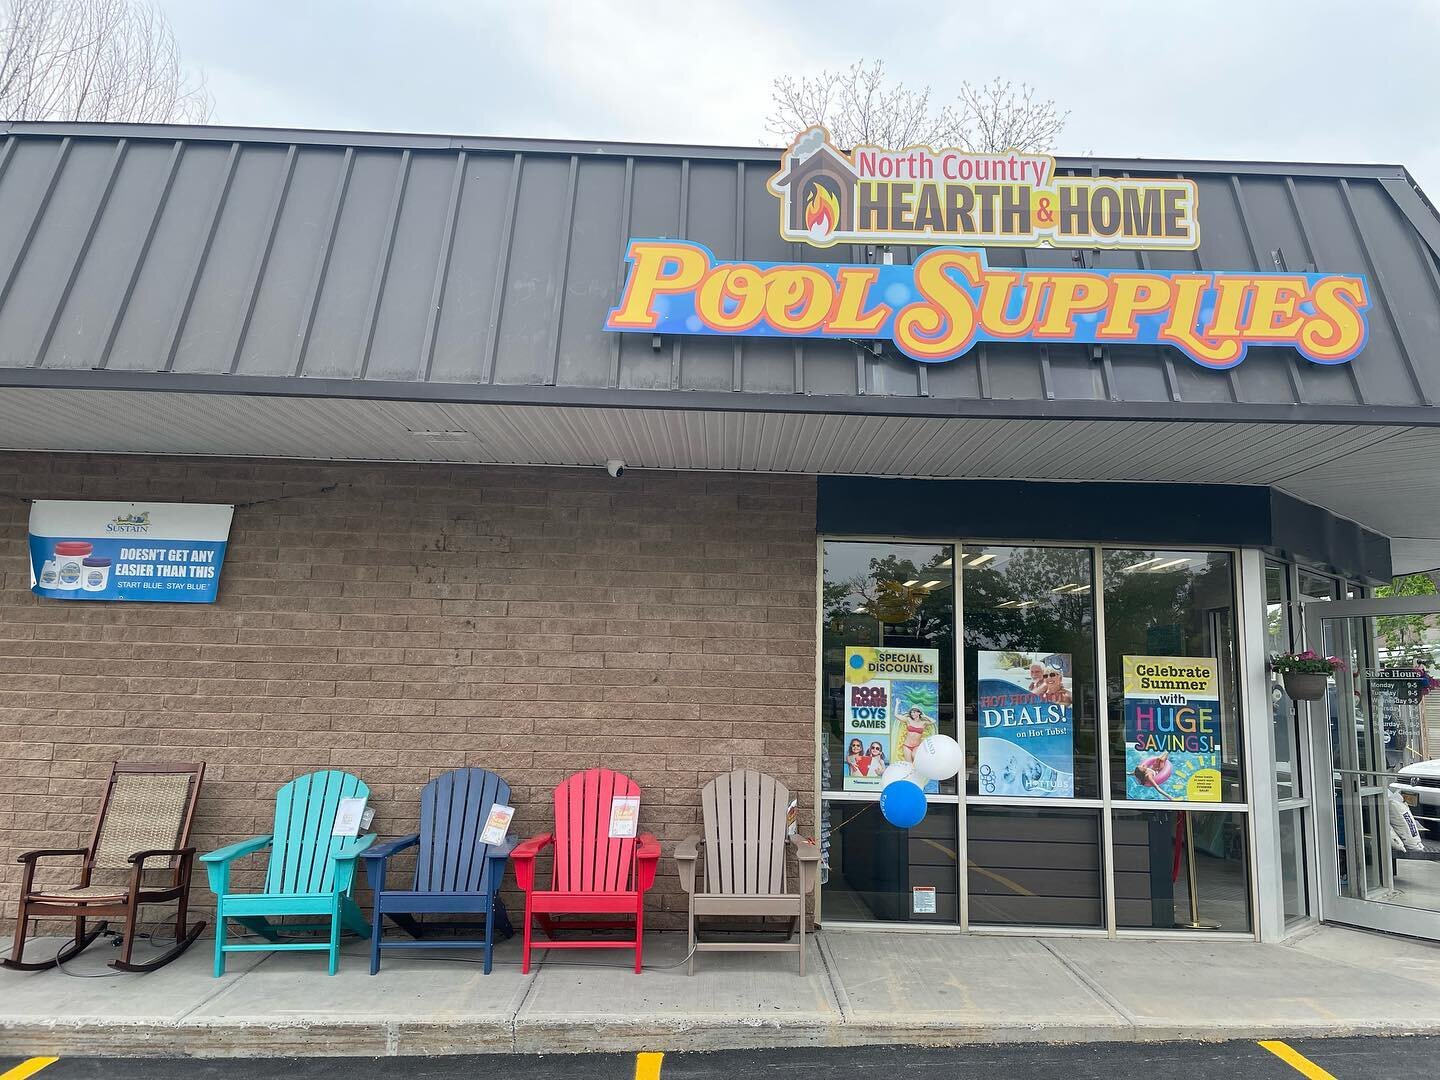 Lot of grand openings happening  today in WATERTOWN!

🎉Congratulations to our friends from @north_country_hearthandhome and @masseys.furniture.barn opening their 2nd location!

☀️Now you can ship pools, hot tubs, pool supplies and outdoor furniture 